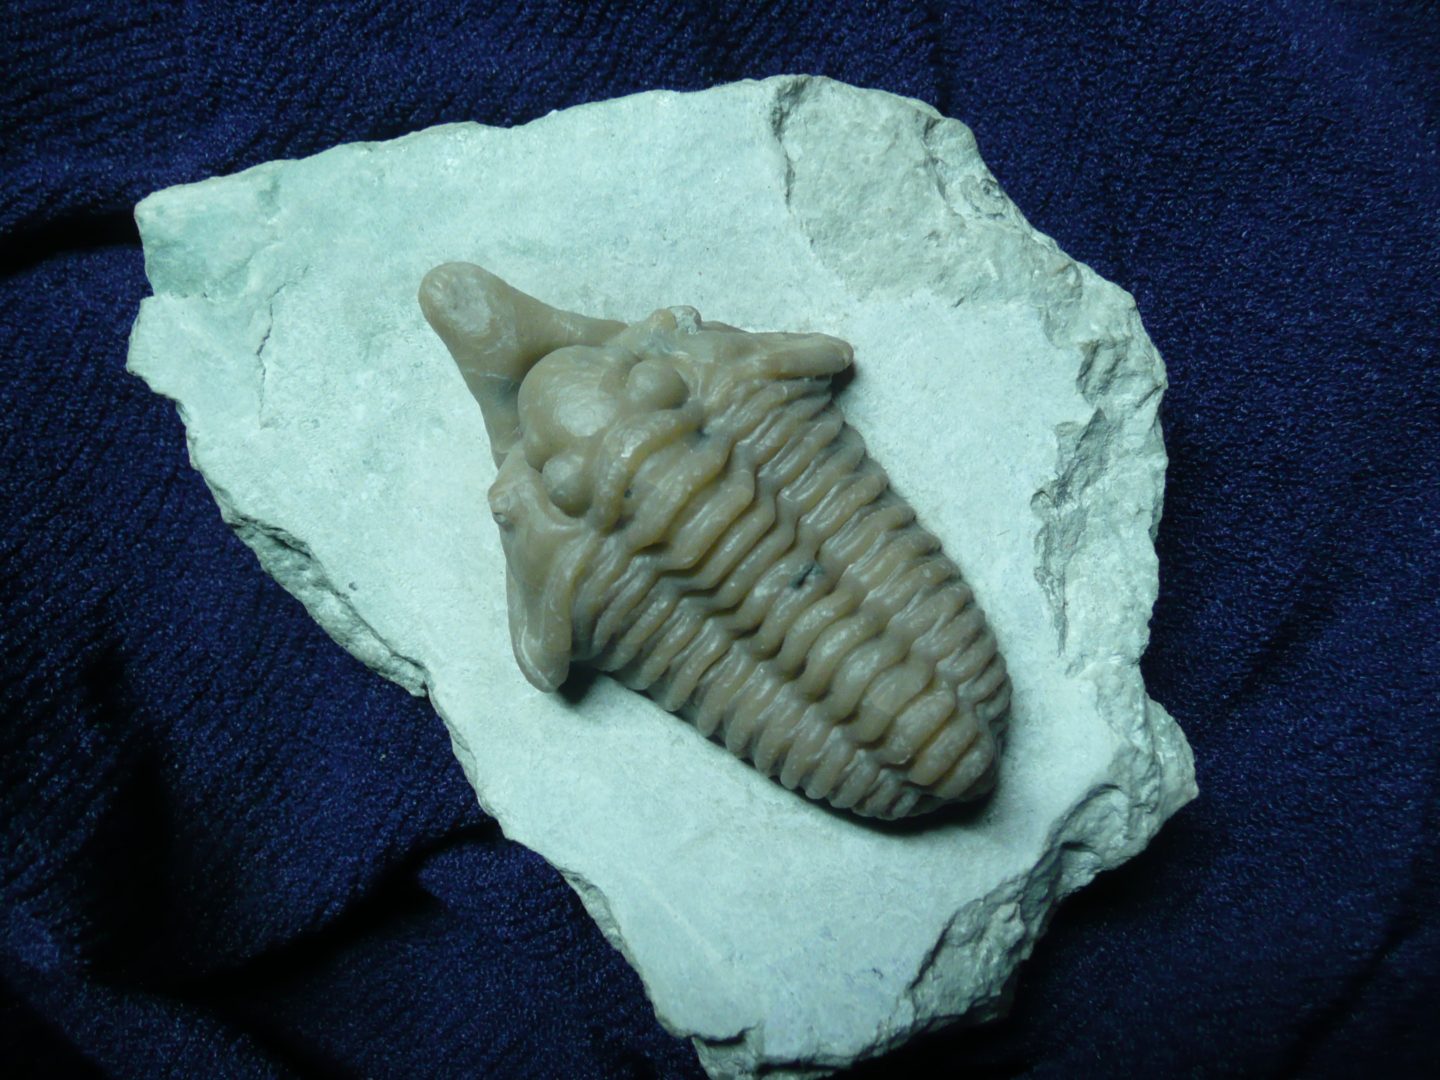 Figure 3. Spathacalymene nasuta from the Silurian Massie Shale. Specimen is 2.25 inches long. Prepared by Ben Cooper.